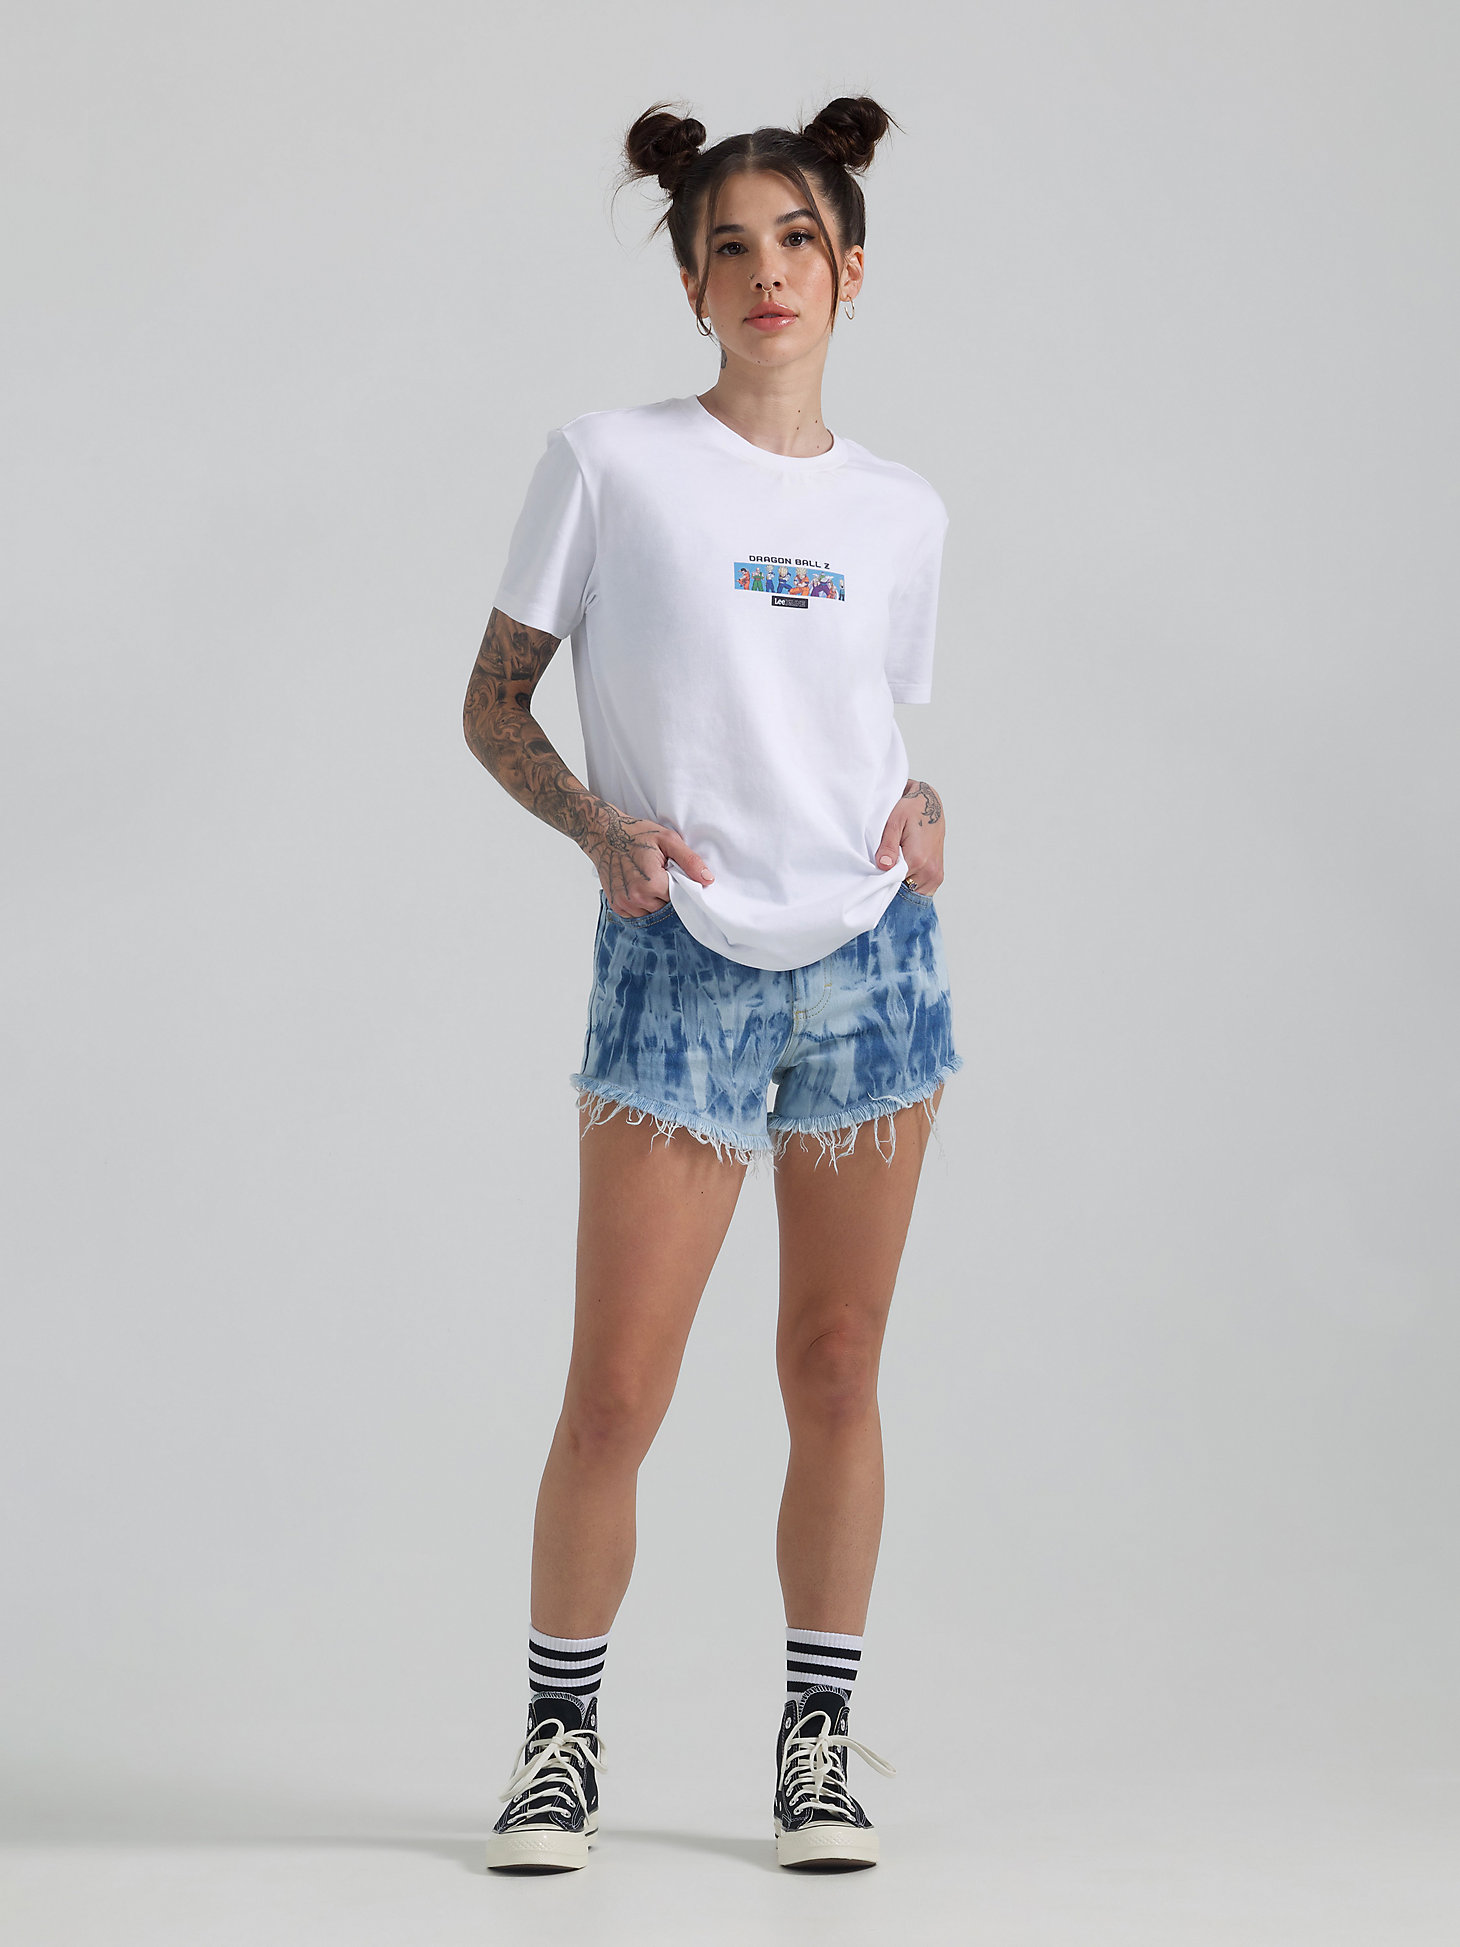 Unisex Lee and Dragon Ball Z Usual Suspects Tee in White alternative view 2